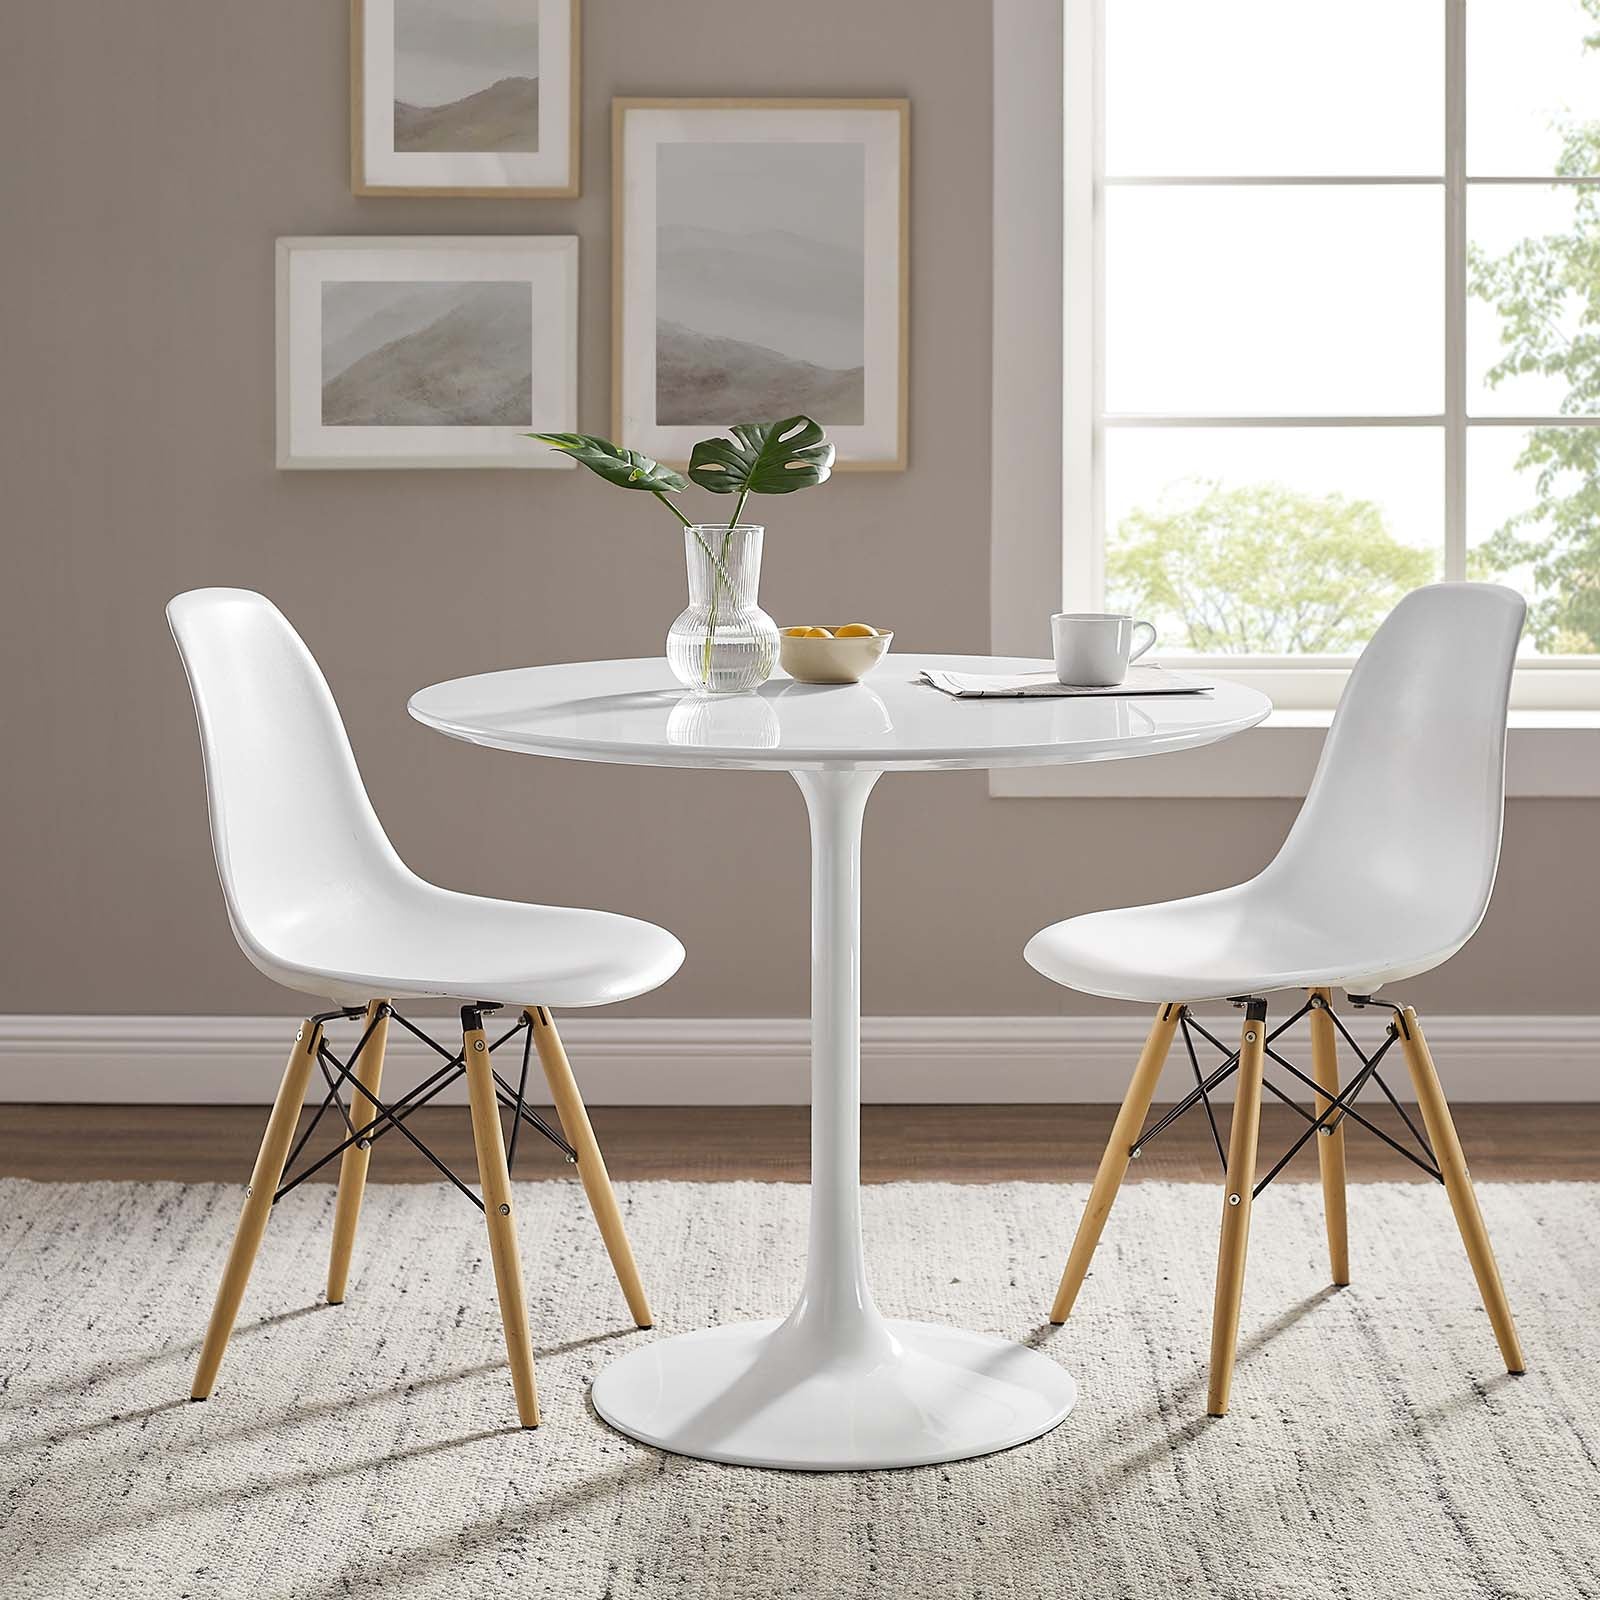 White Lacquer Tulip Dining Table - Round